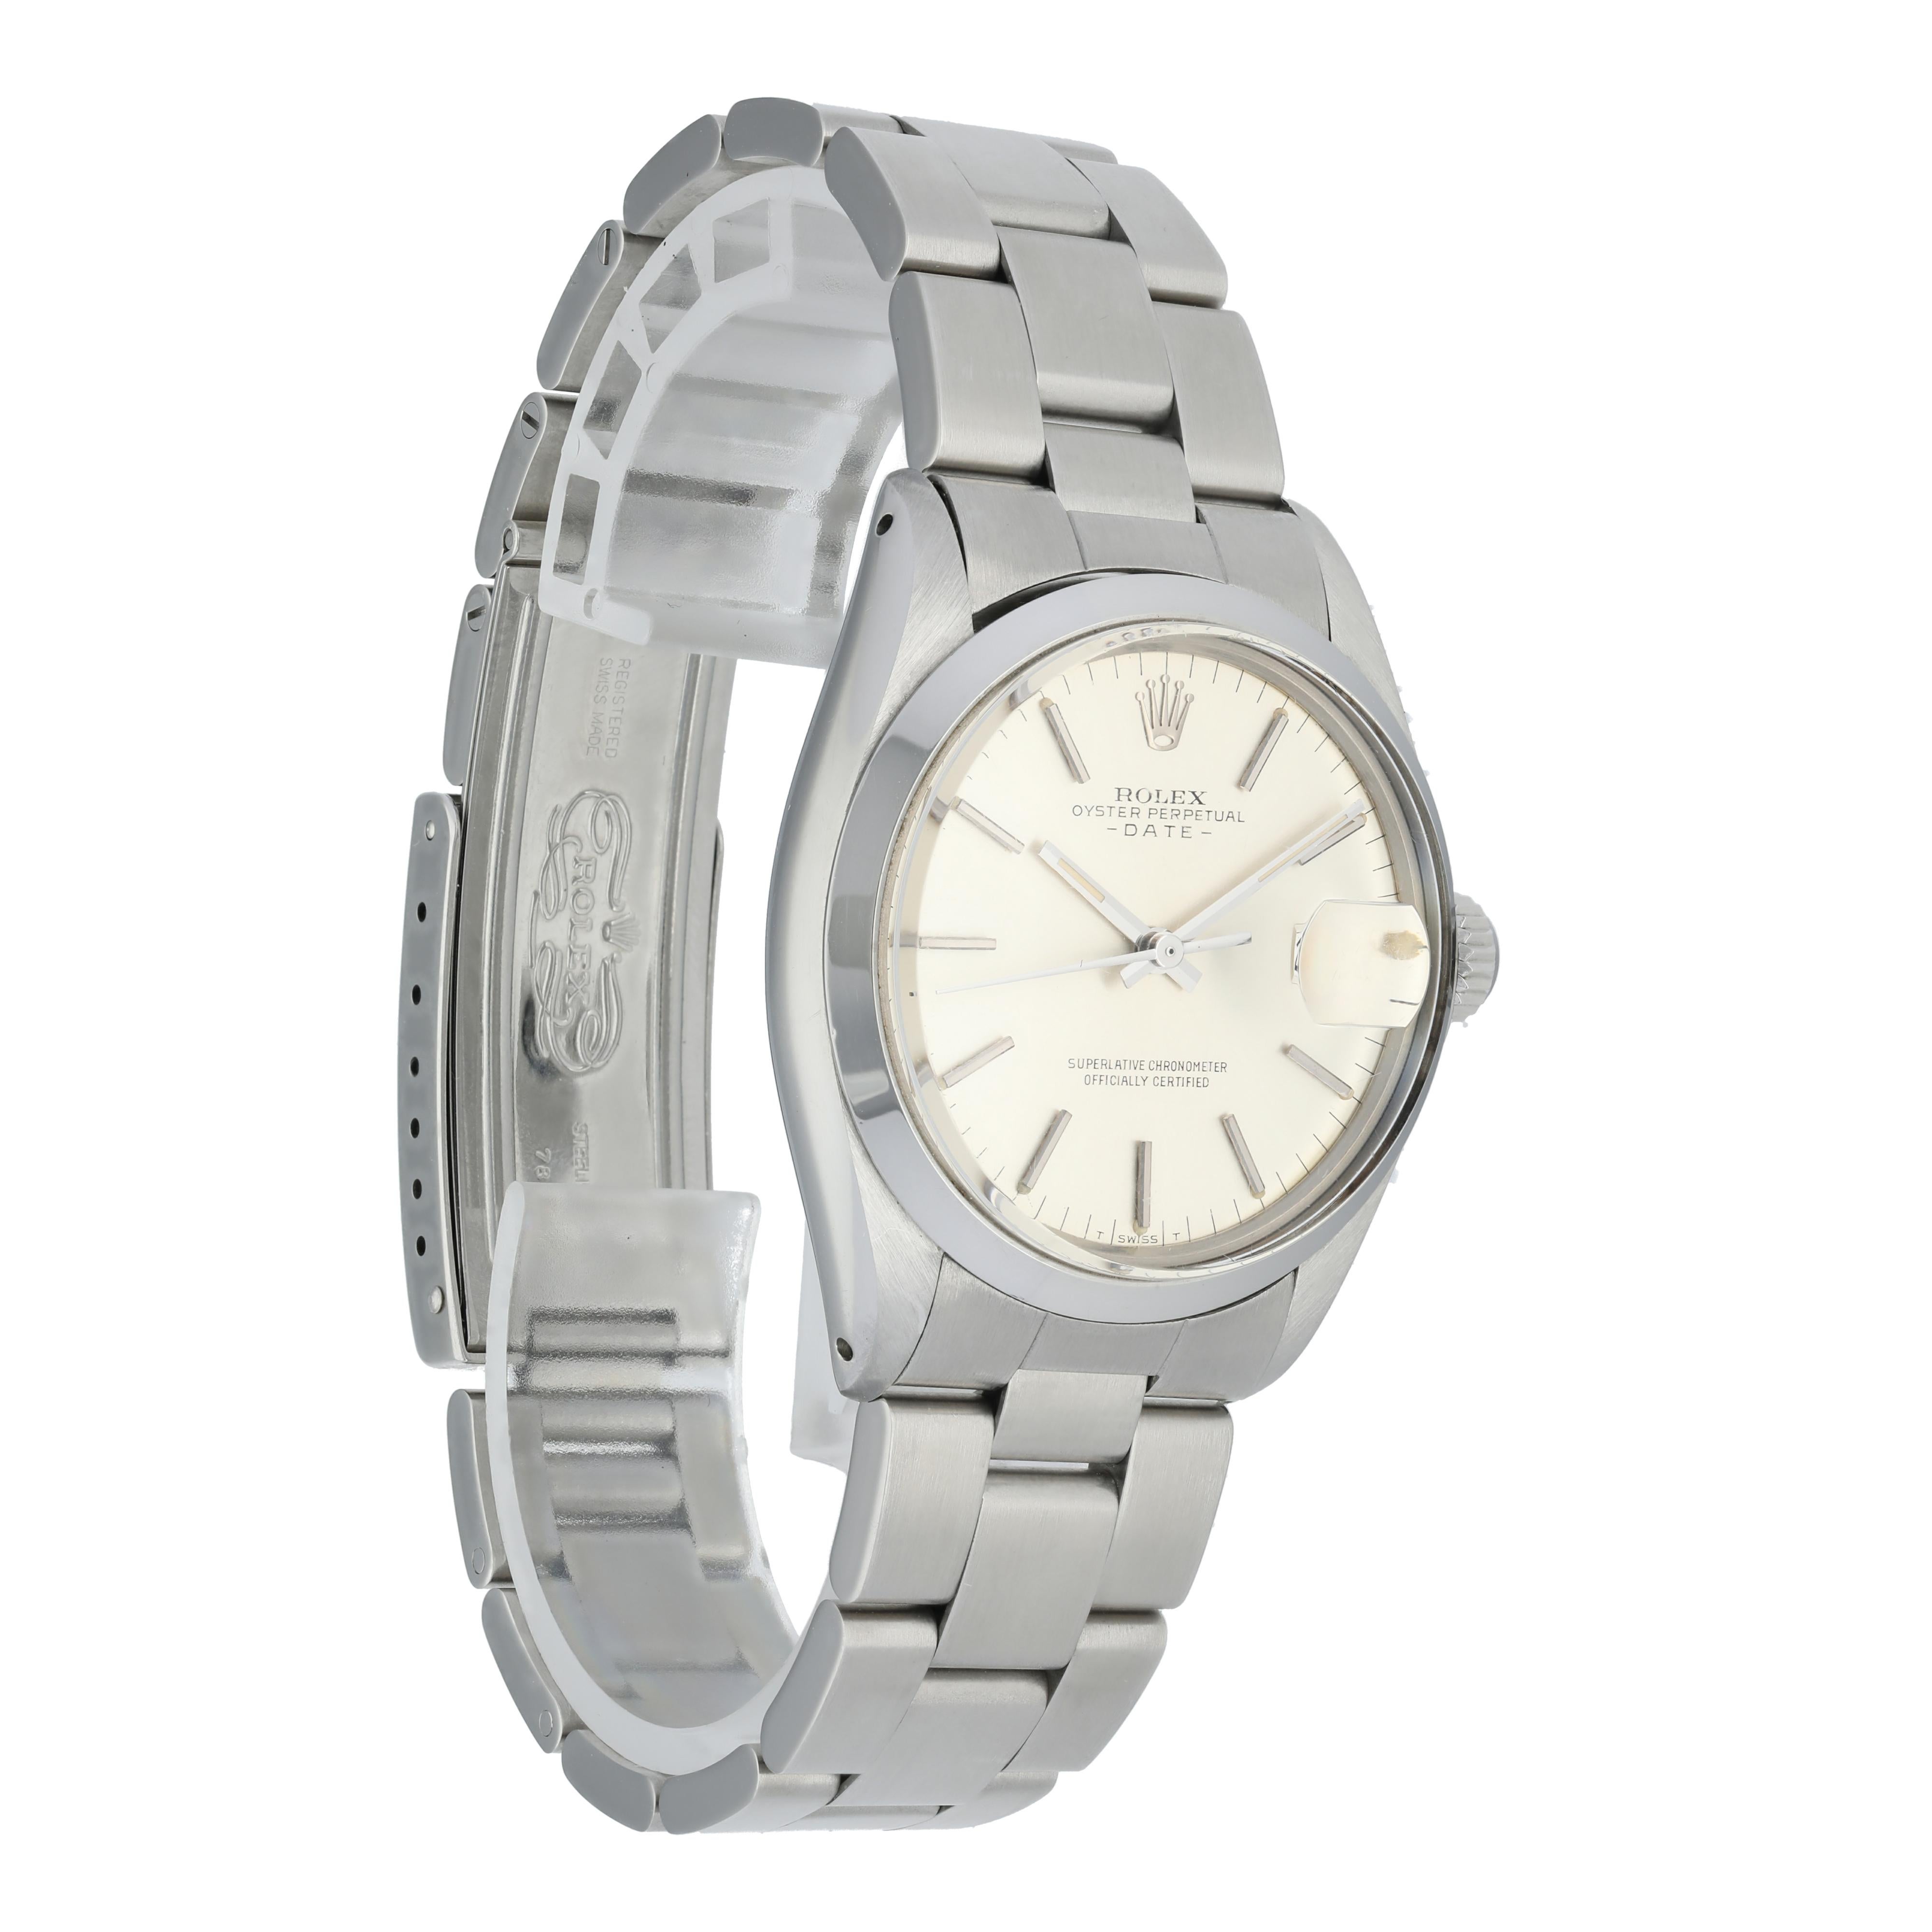 Rolex Oyster Perpetual Date 1500 Men's Watch In Excellent Condition For Sale In New York, NY